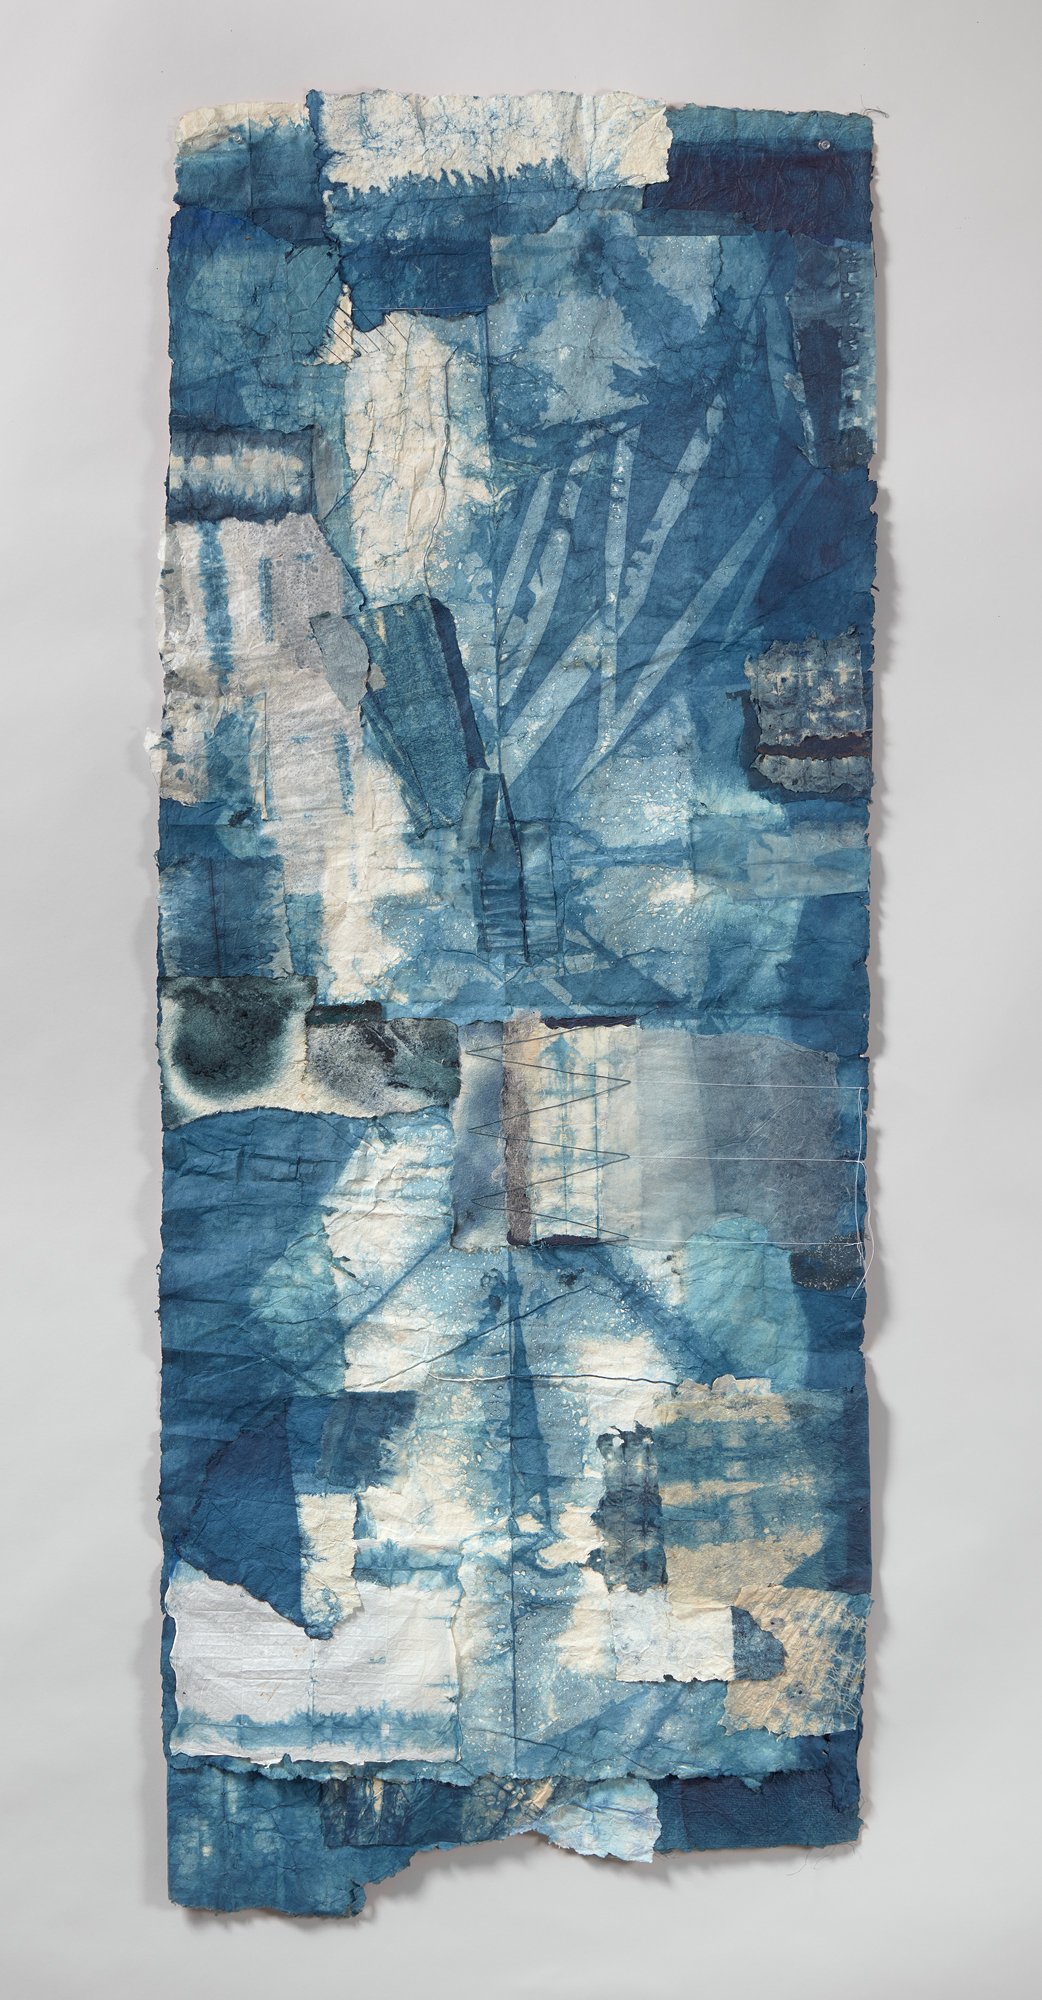 BLUE ACCORD, 70in.h x 27in.w., thread,fabric, and indigo dyed handmade paper, 2021